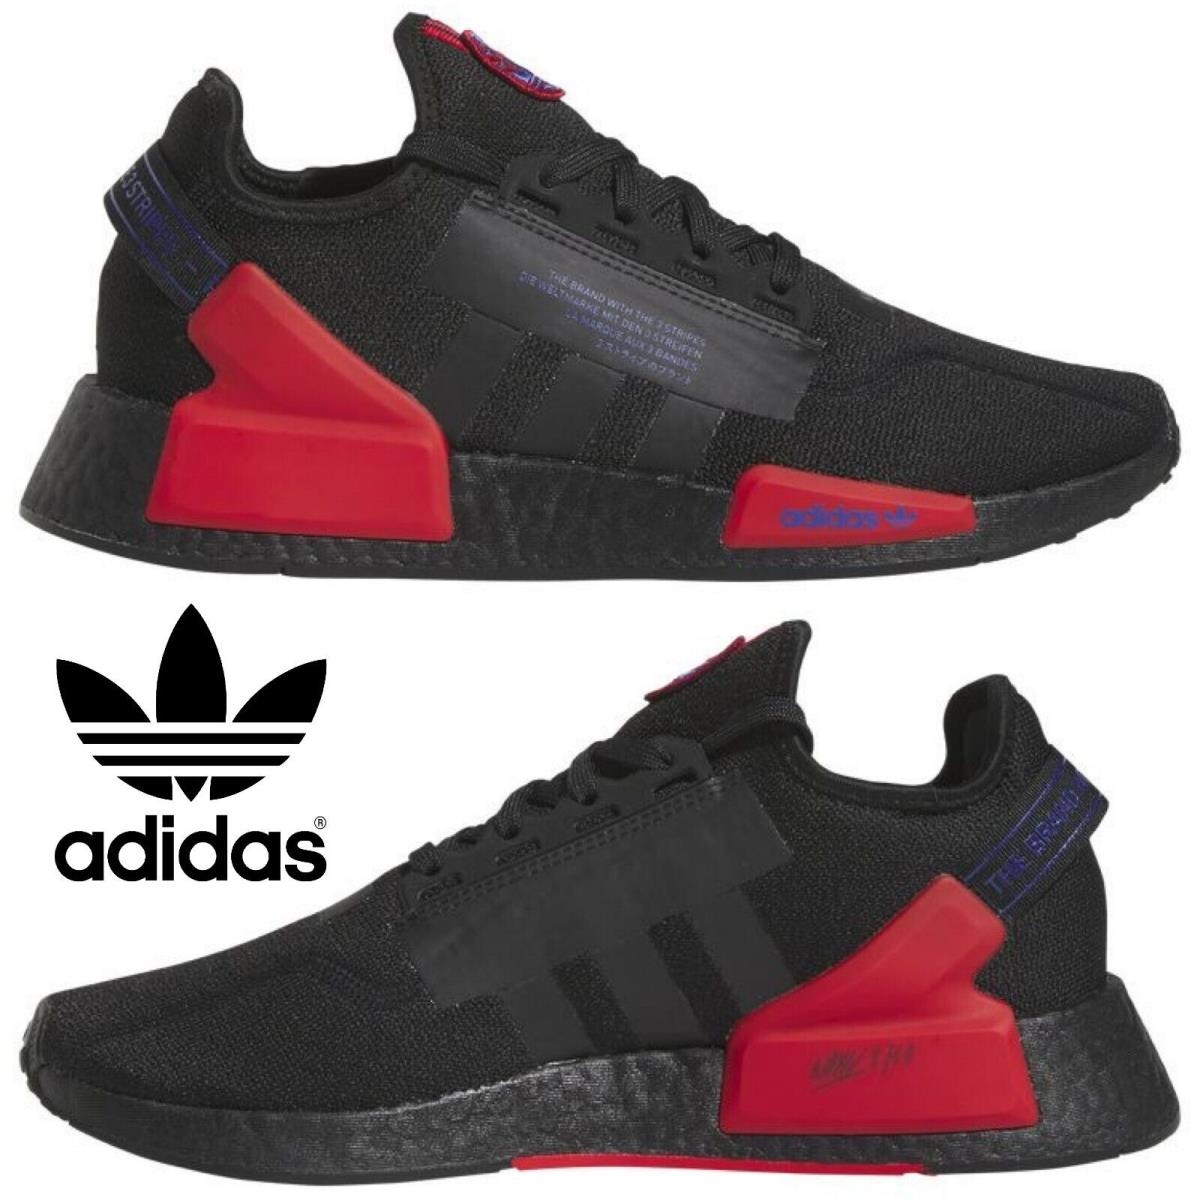 Adidas Originals Nmd R1 V2 Men`s Sneakers Running Shoes Gym Casual Black Red